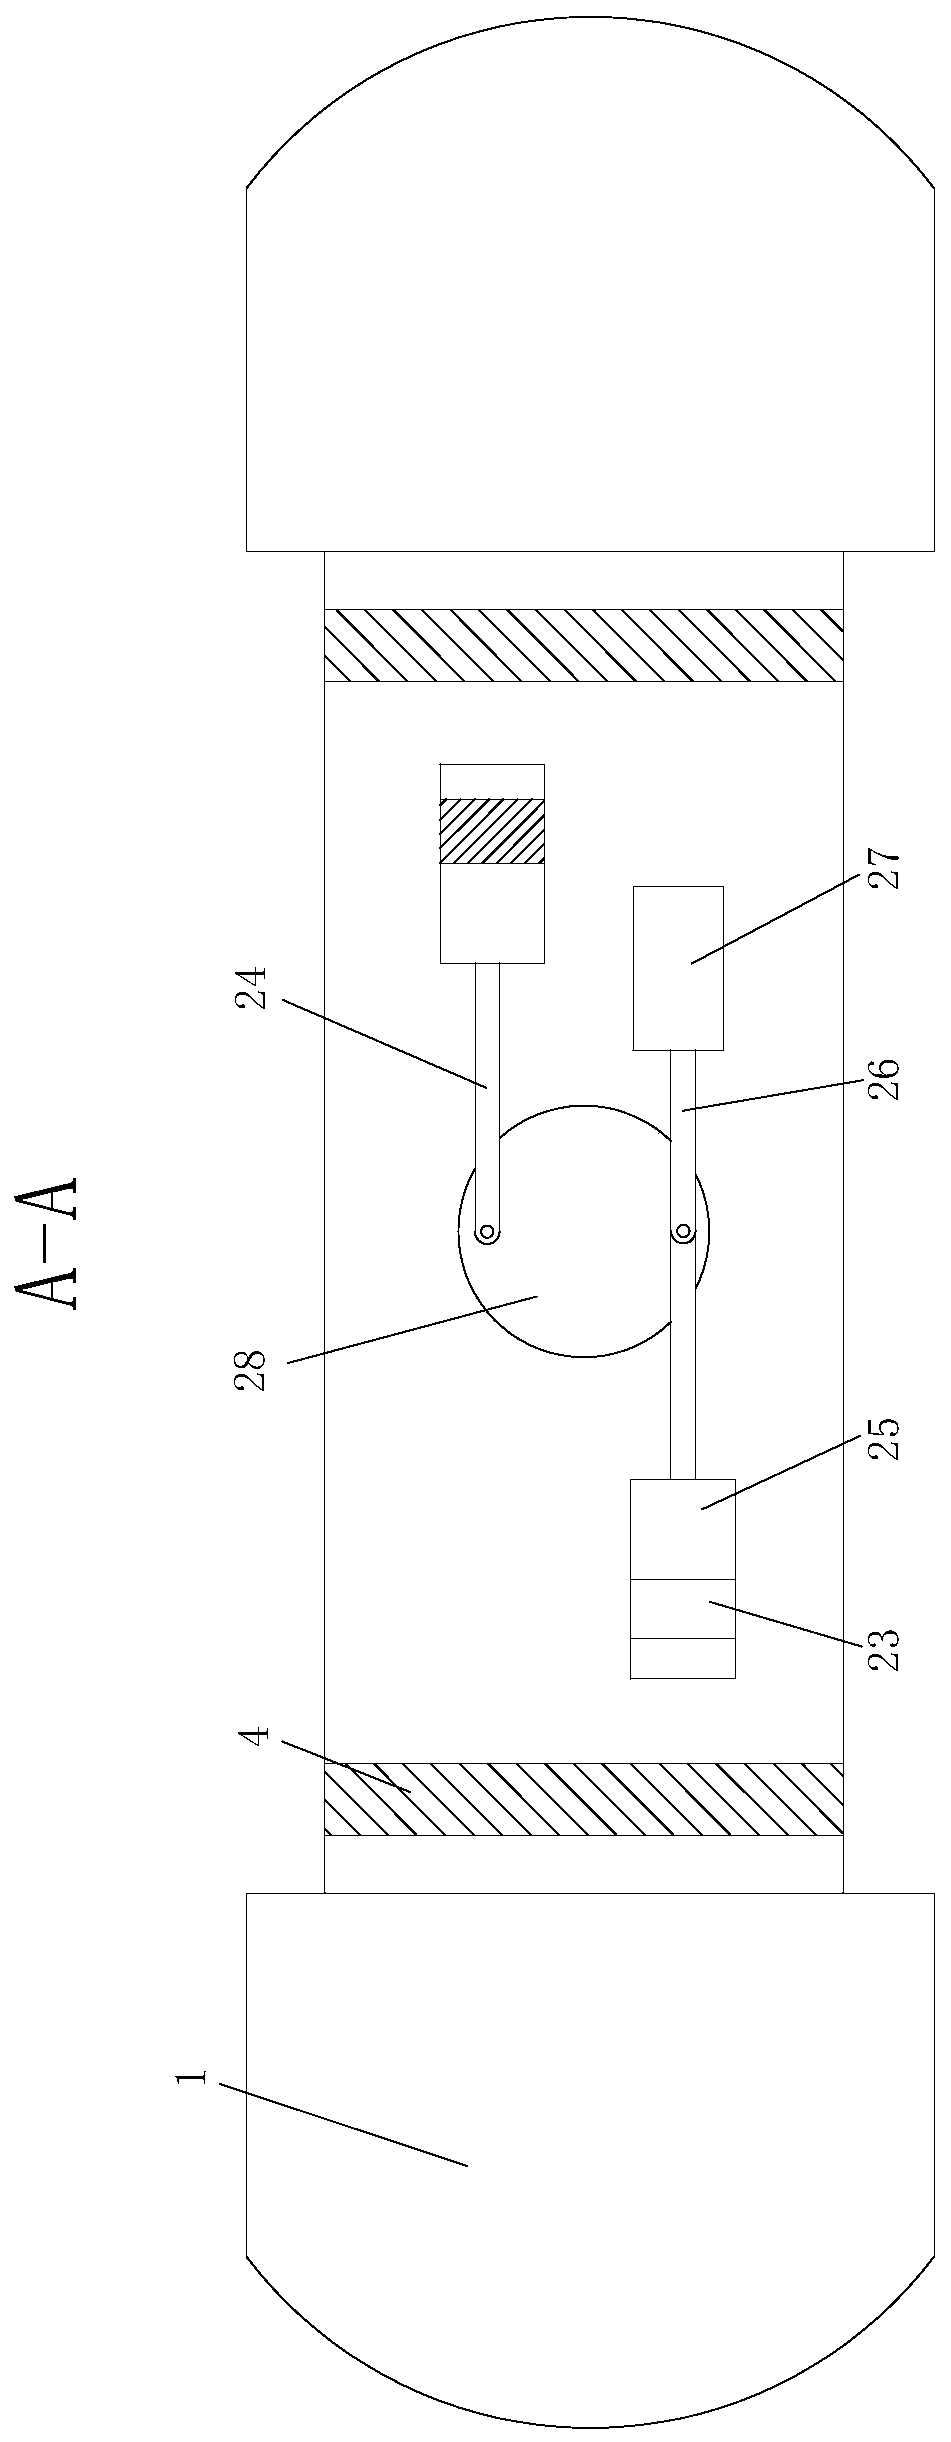 A Protection Method for Asynchronous Motor